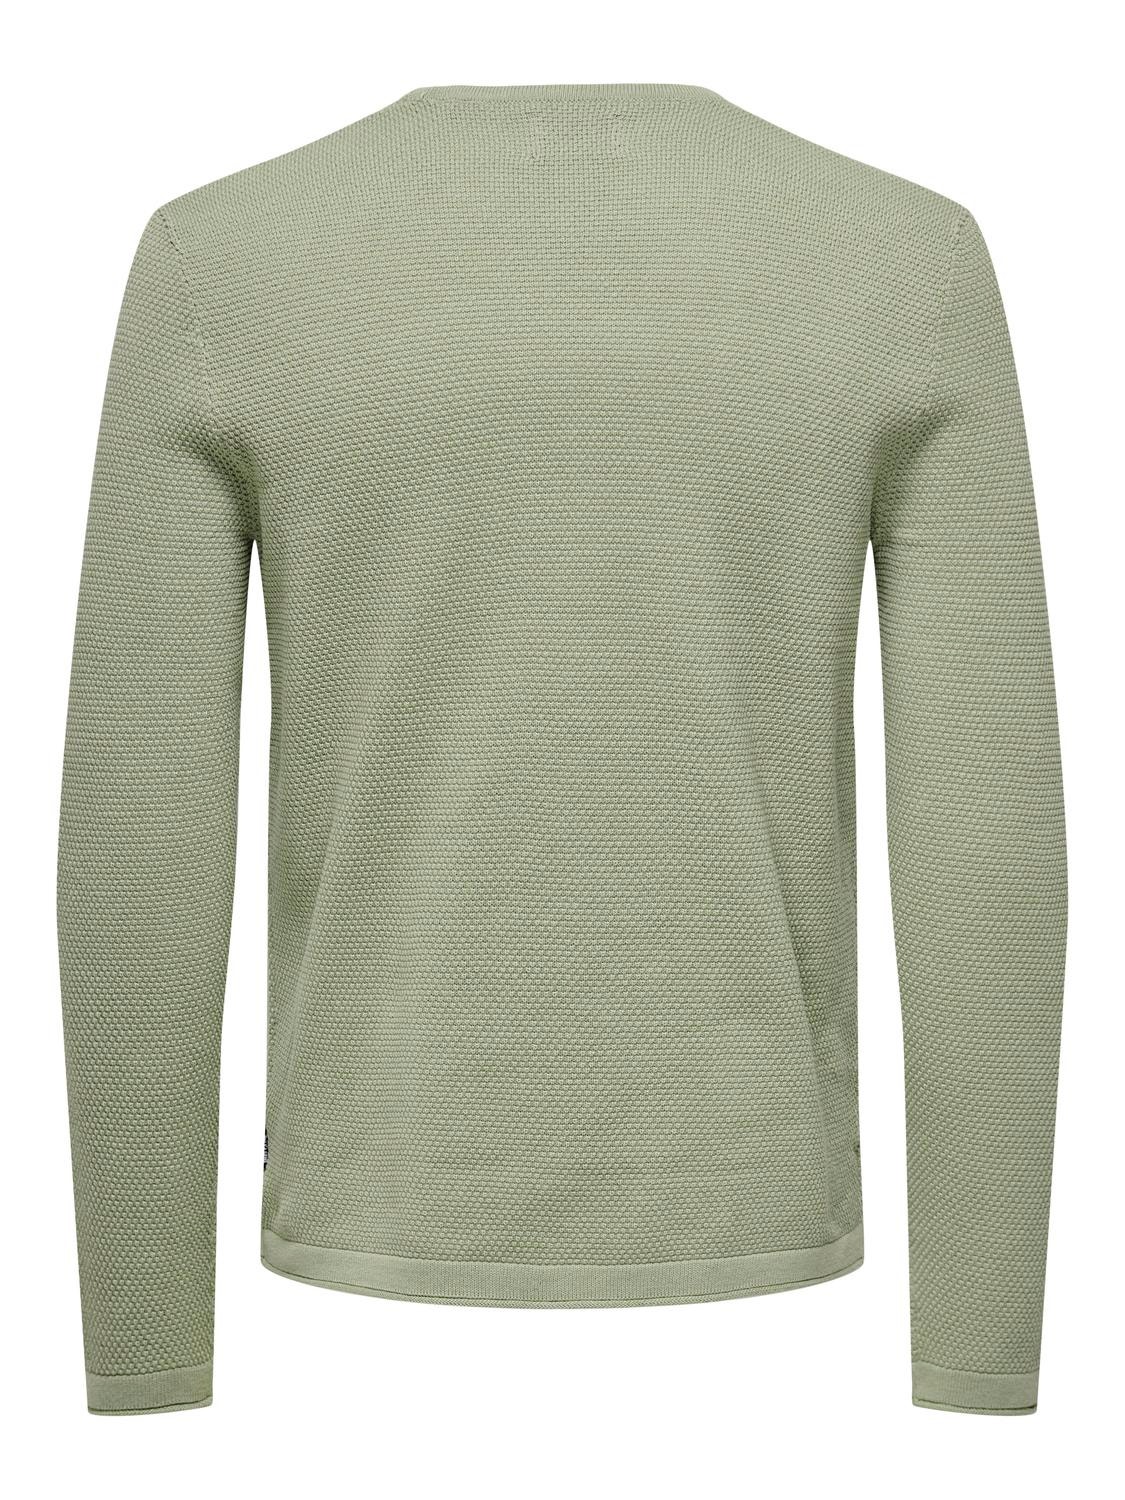 ONLY & SONS O-neck knit sweat -Seagrass - 22016980